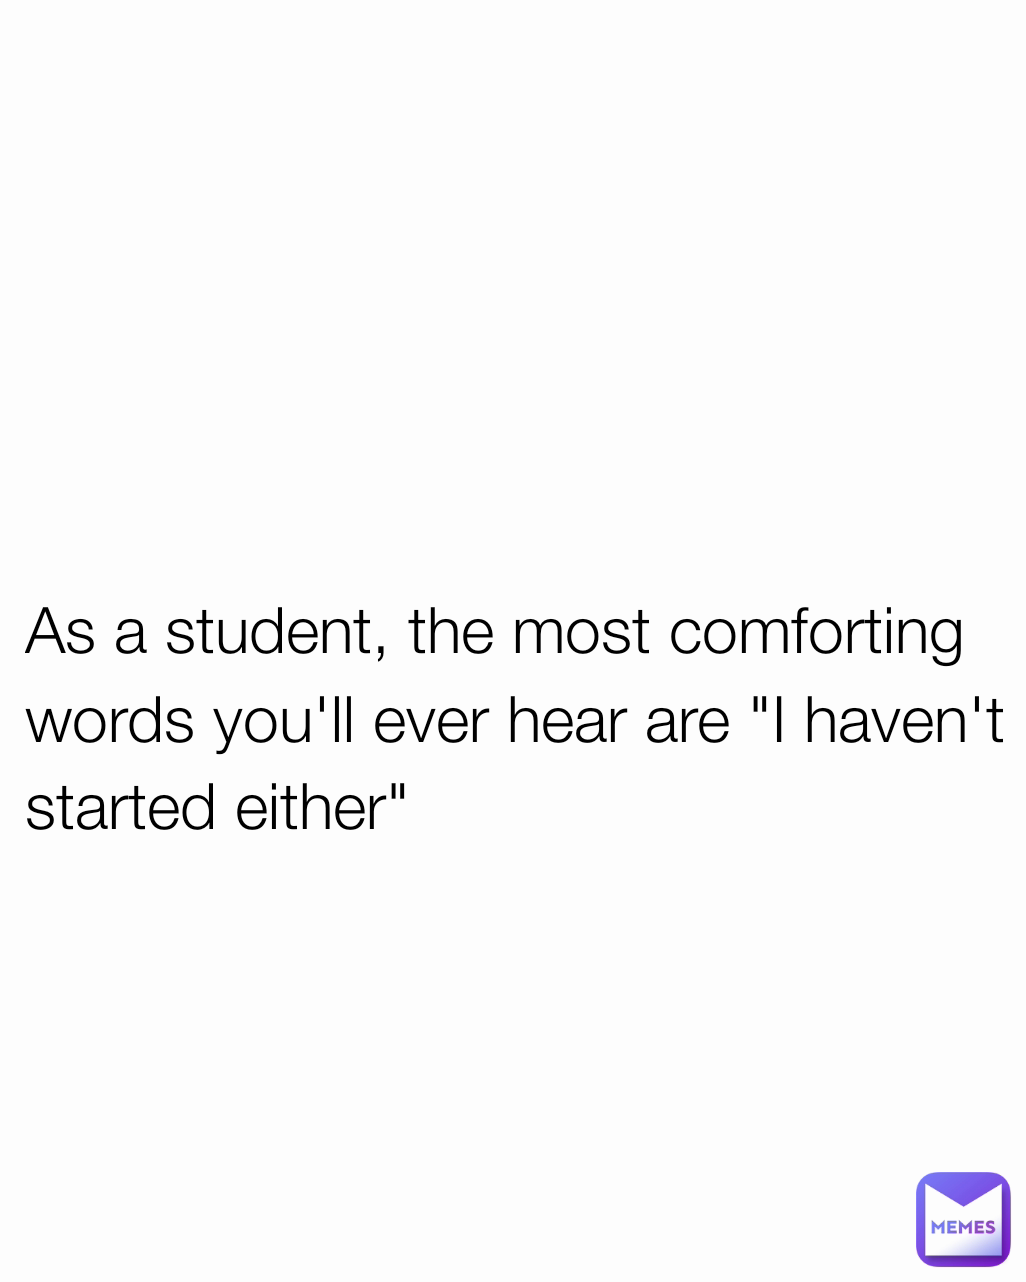 As a student, the most comforting words you'll ever hear are "I haven't started either"